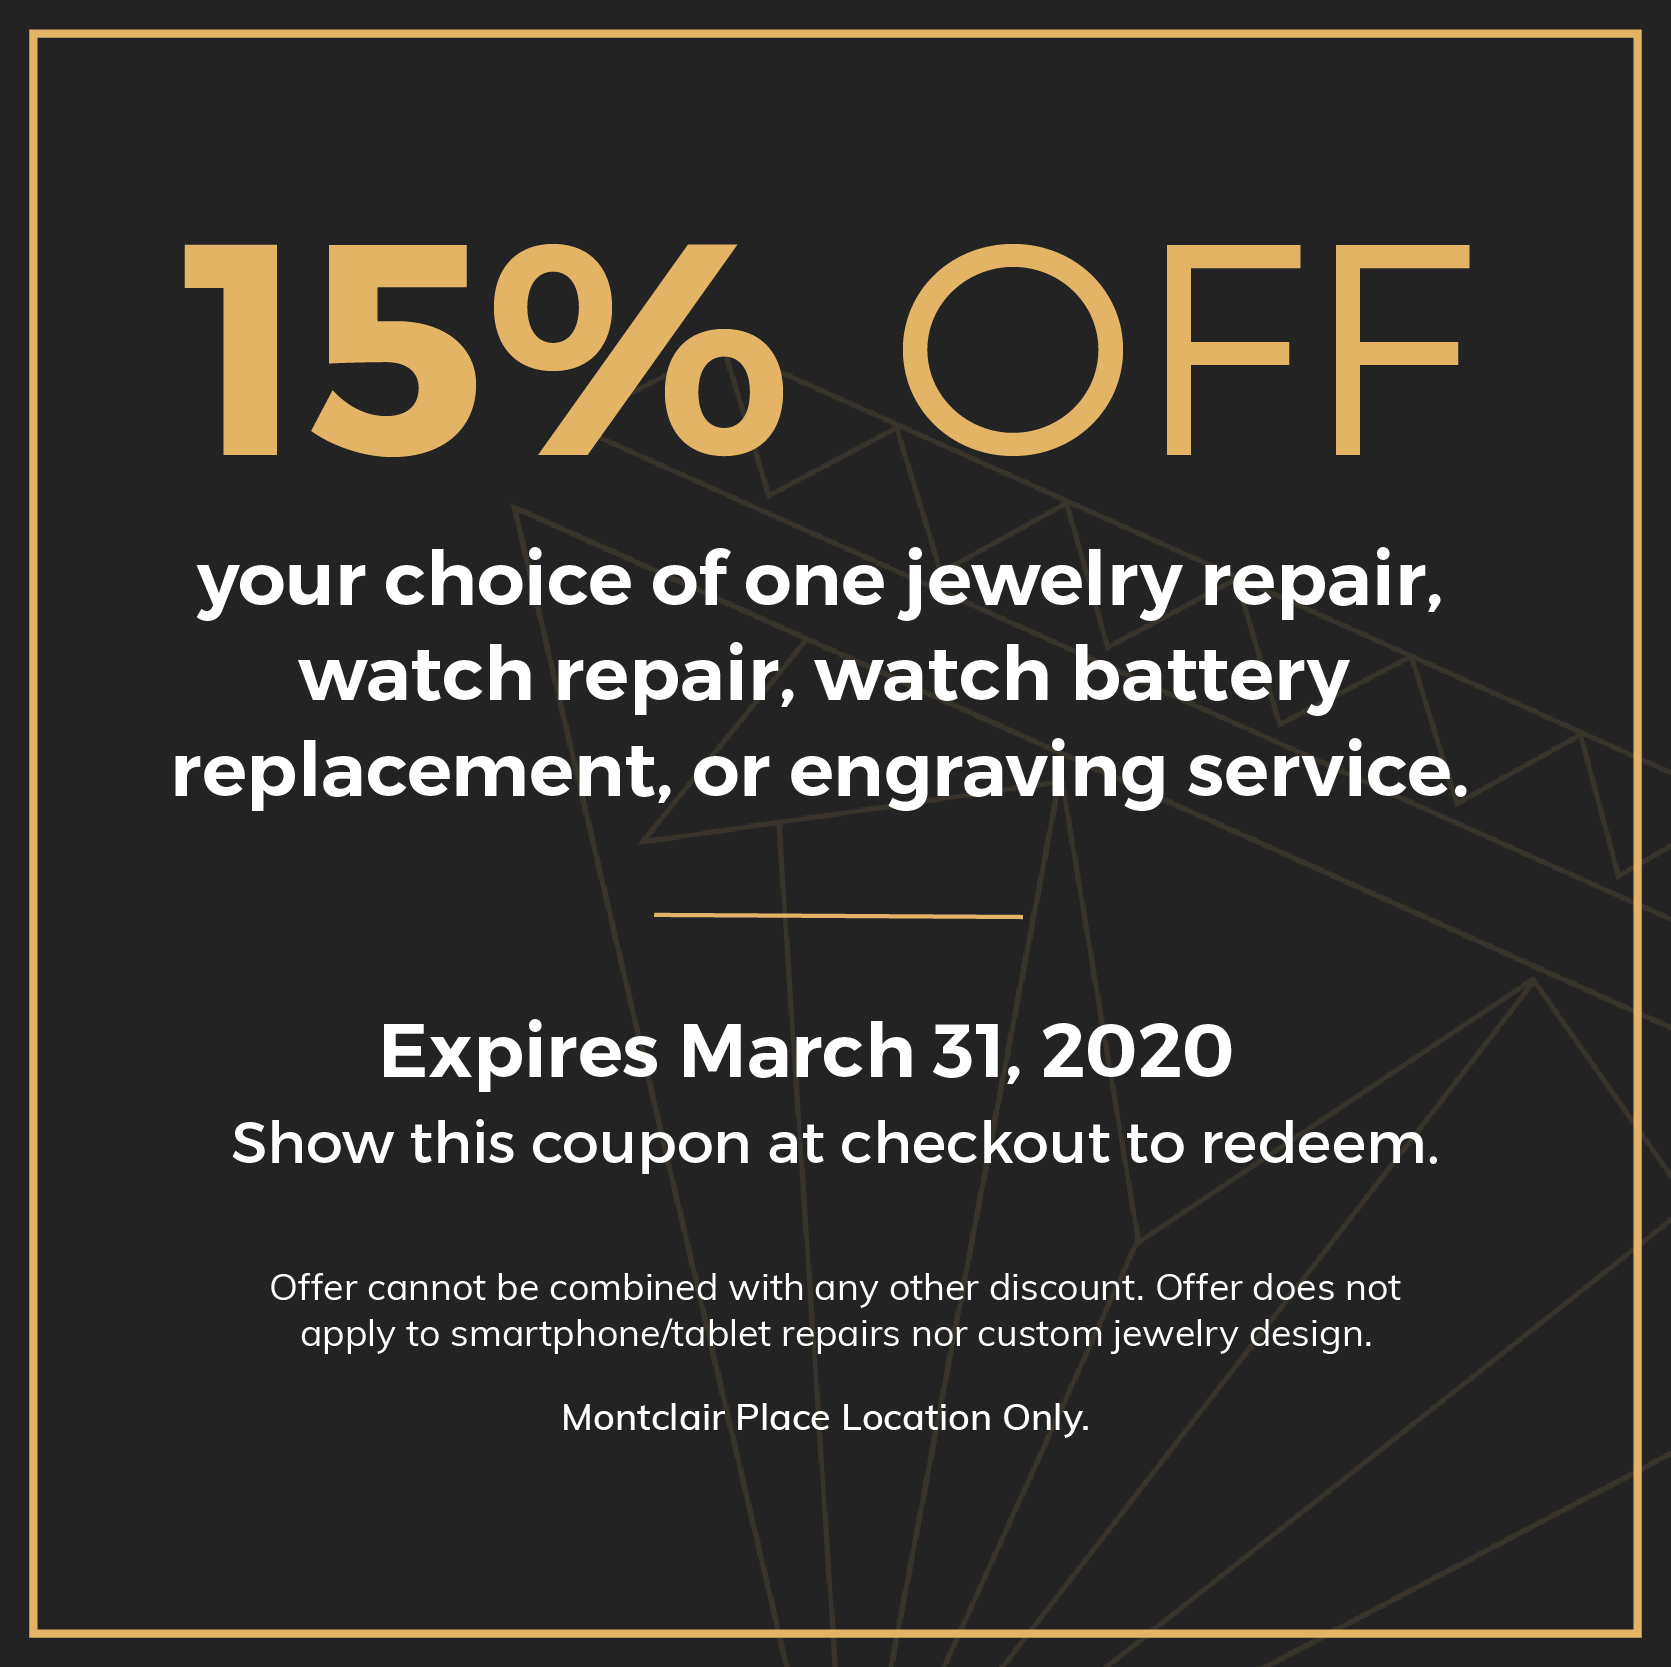 15% OFF. your choice of one jewelry repair, watch repair, watch battery replacement, or engraving service. Expires March 31, 2020. Show this coupon at checkout to redeem. Offer cannot be combined with any other discount. Offer does not apply to smartphone/tablet repairs nor custom jewelry design. Montclair Place Location Only.